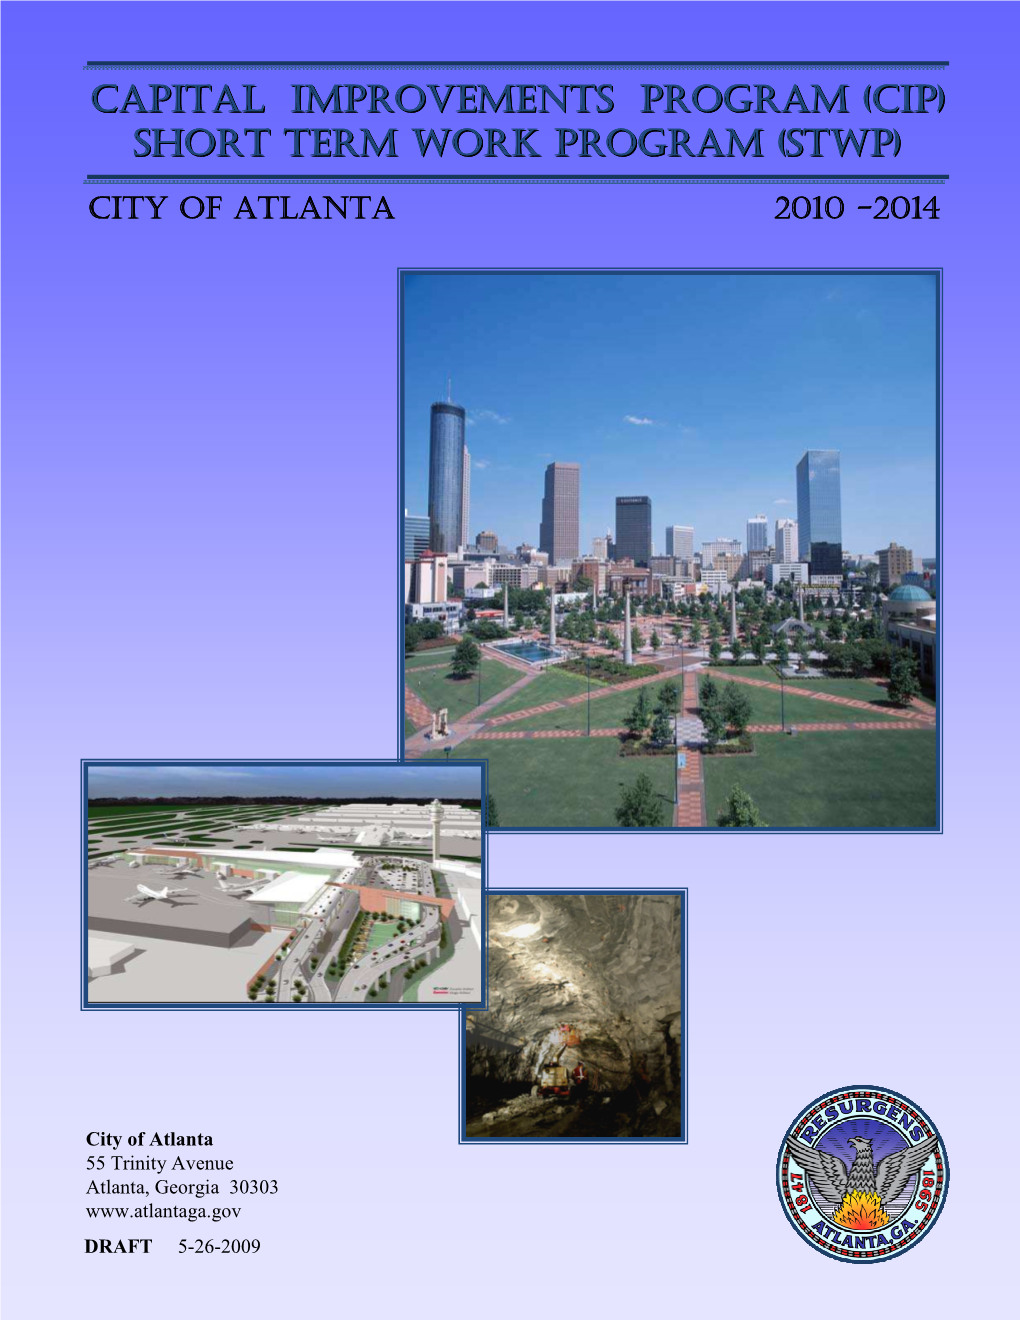 5-21-09 Cover